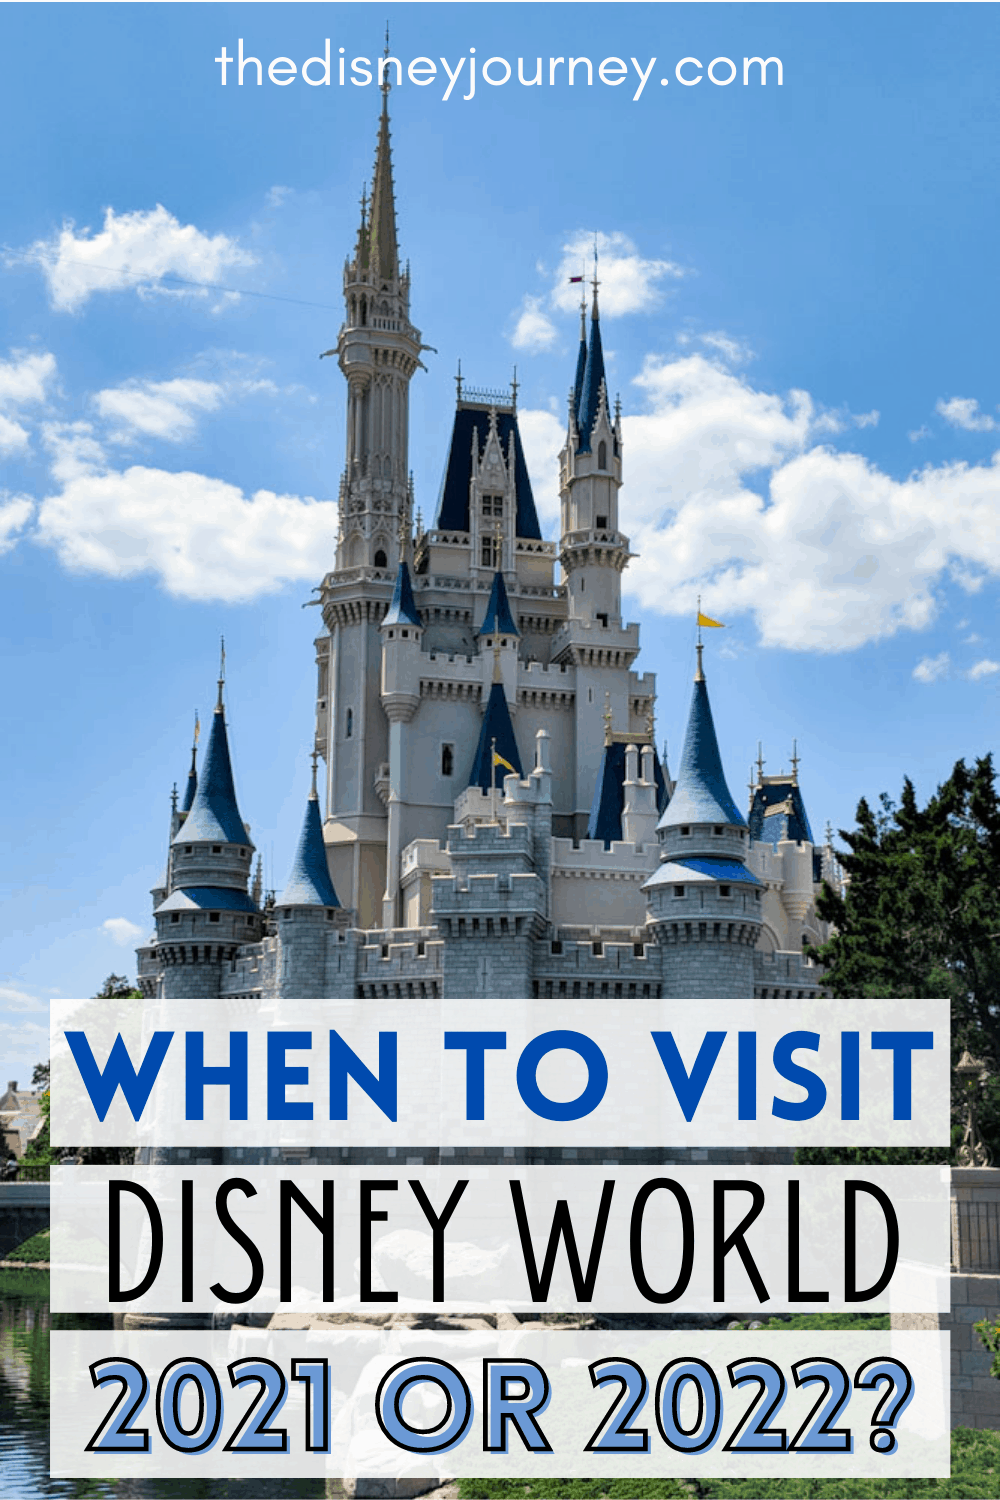 Should I Go to Disney World in 2021 or 2022? - The Disney Journey